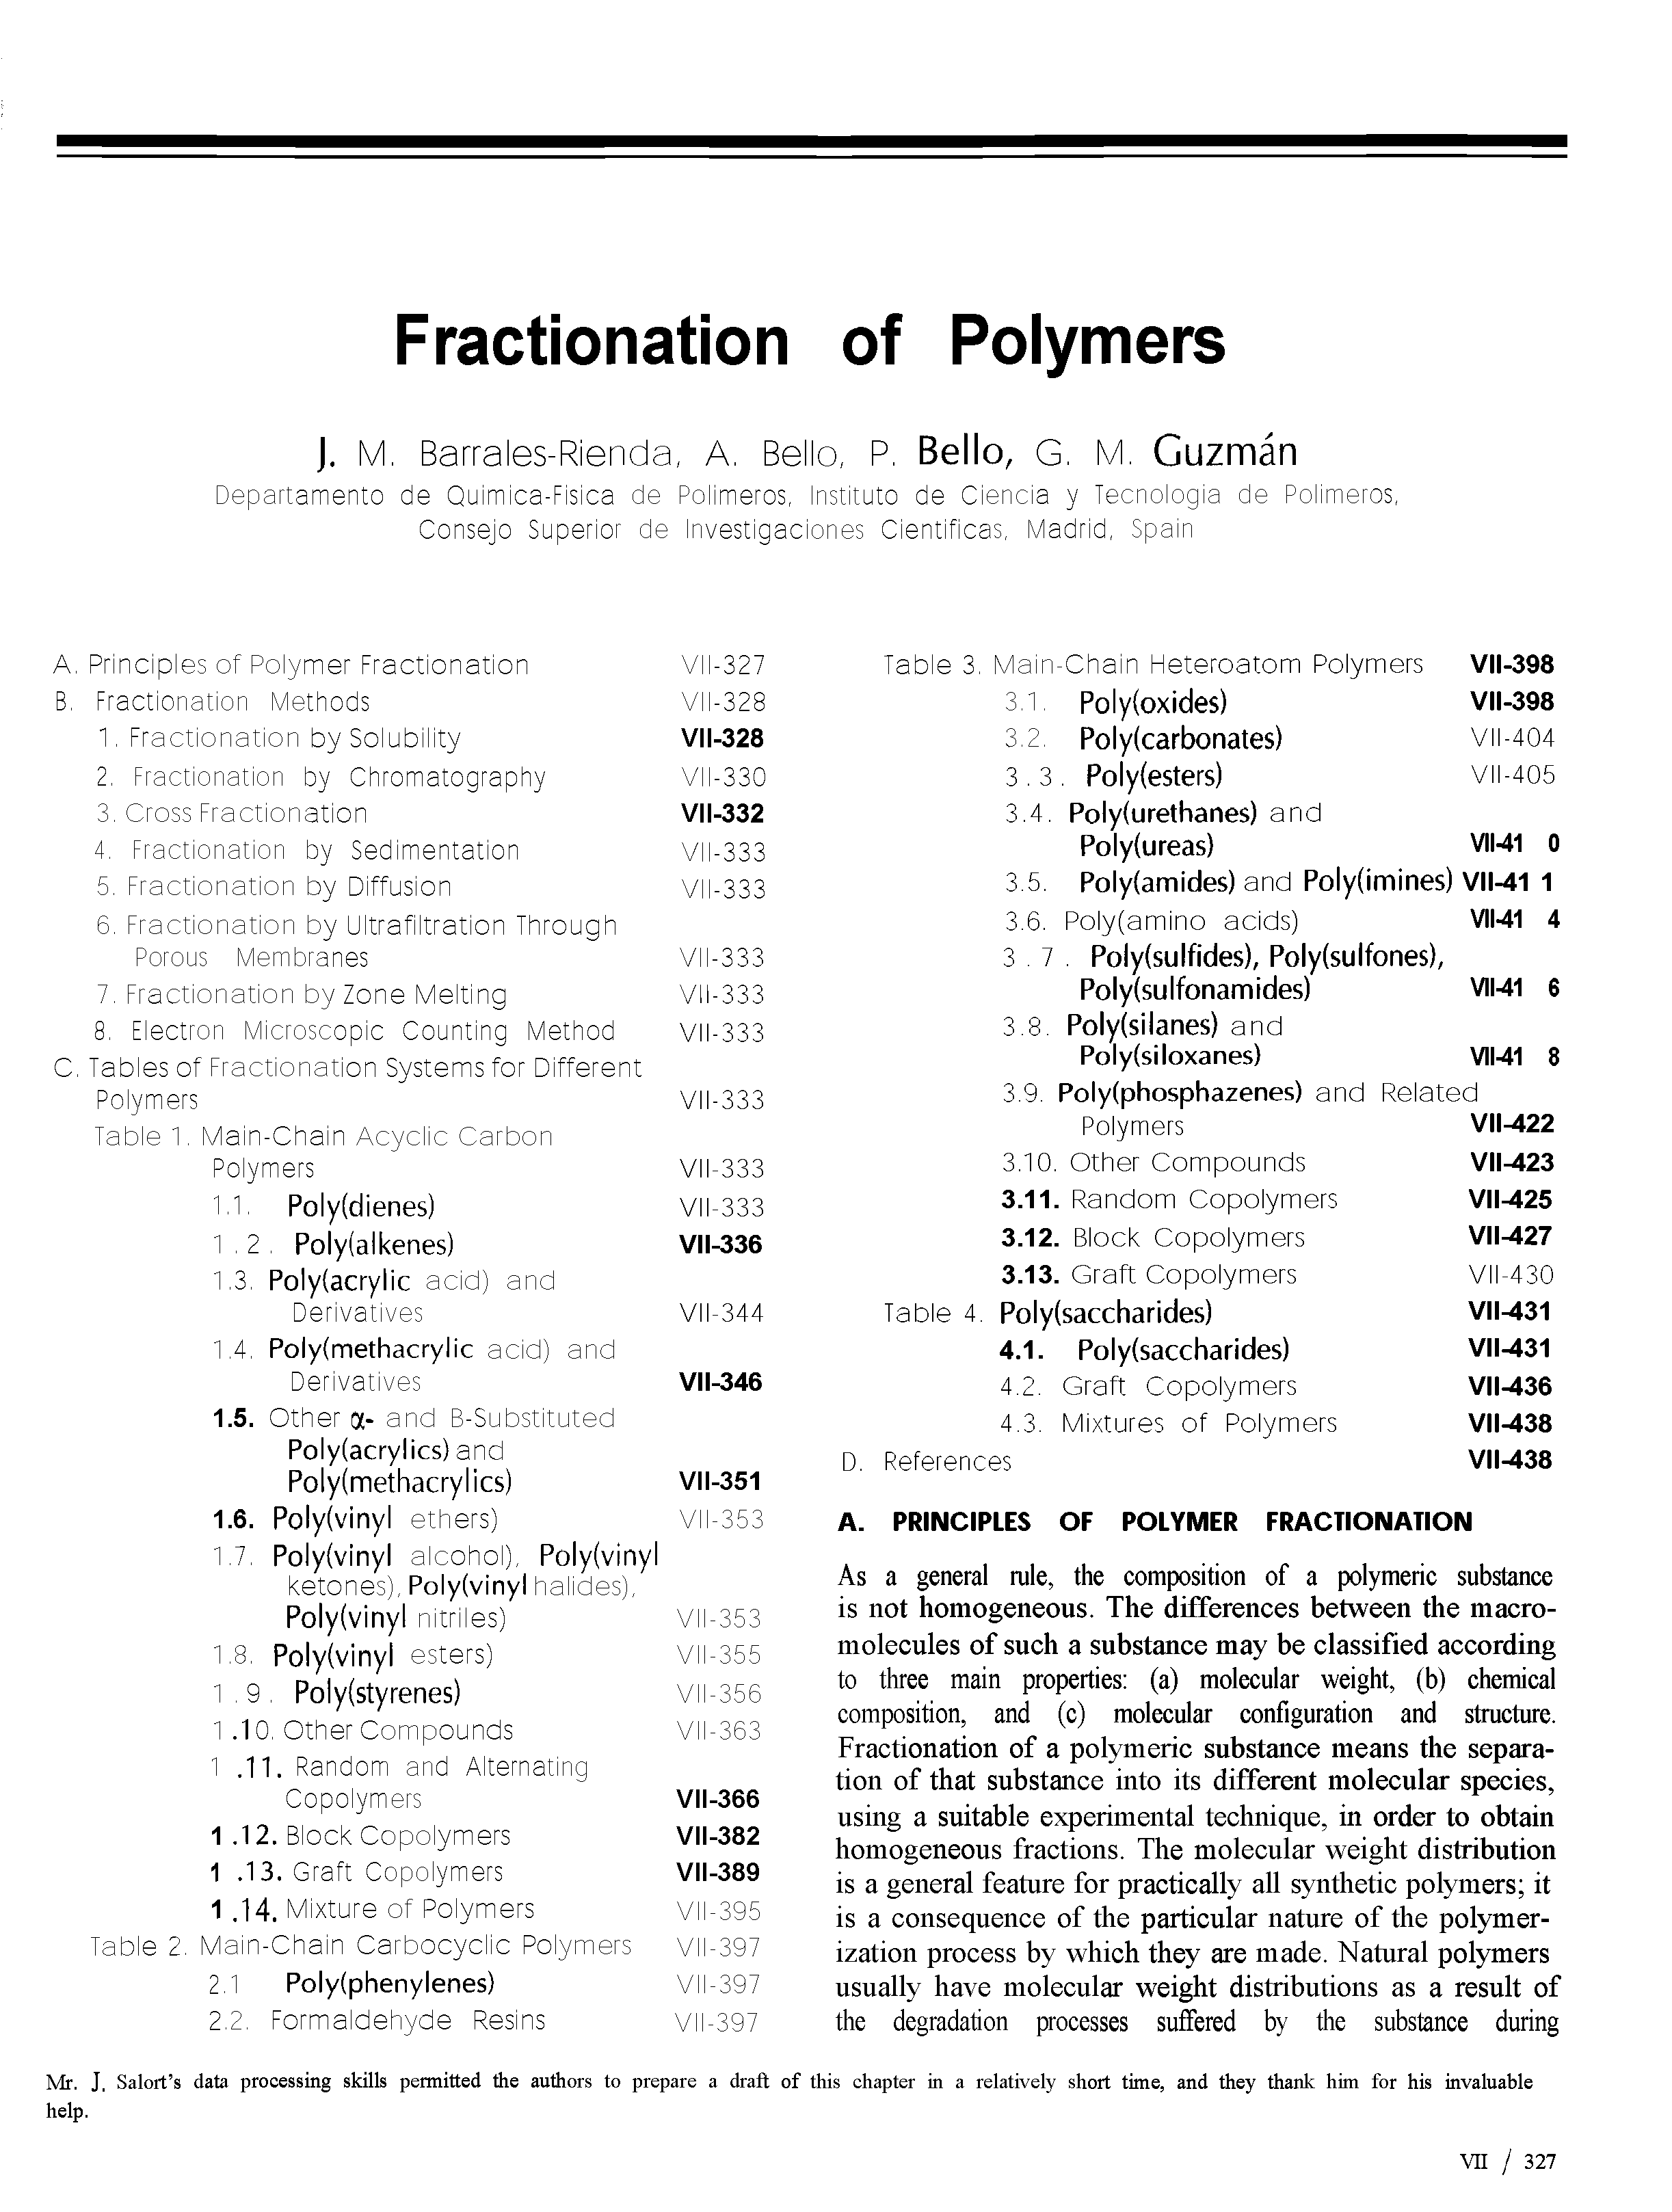 Tables of Fractionation Systems for Different Poly(siloxanes) VII41 8...